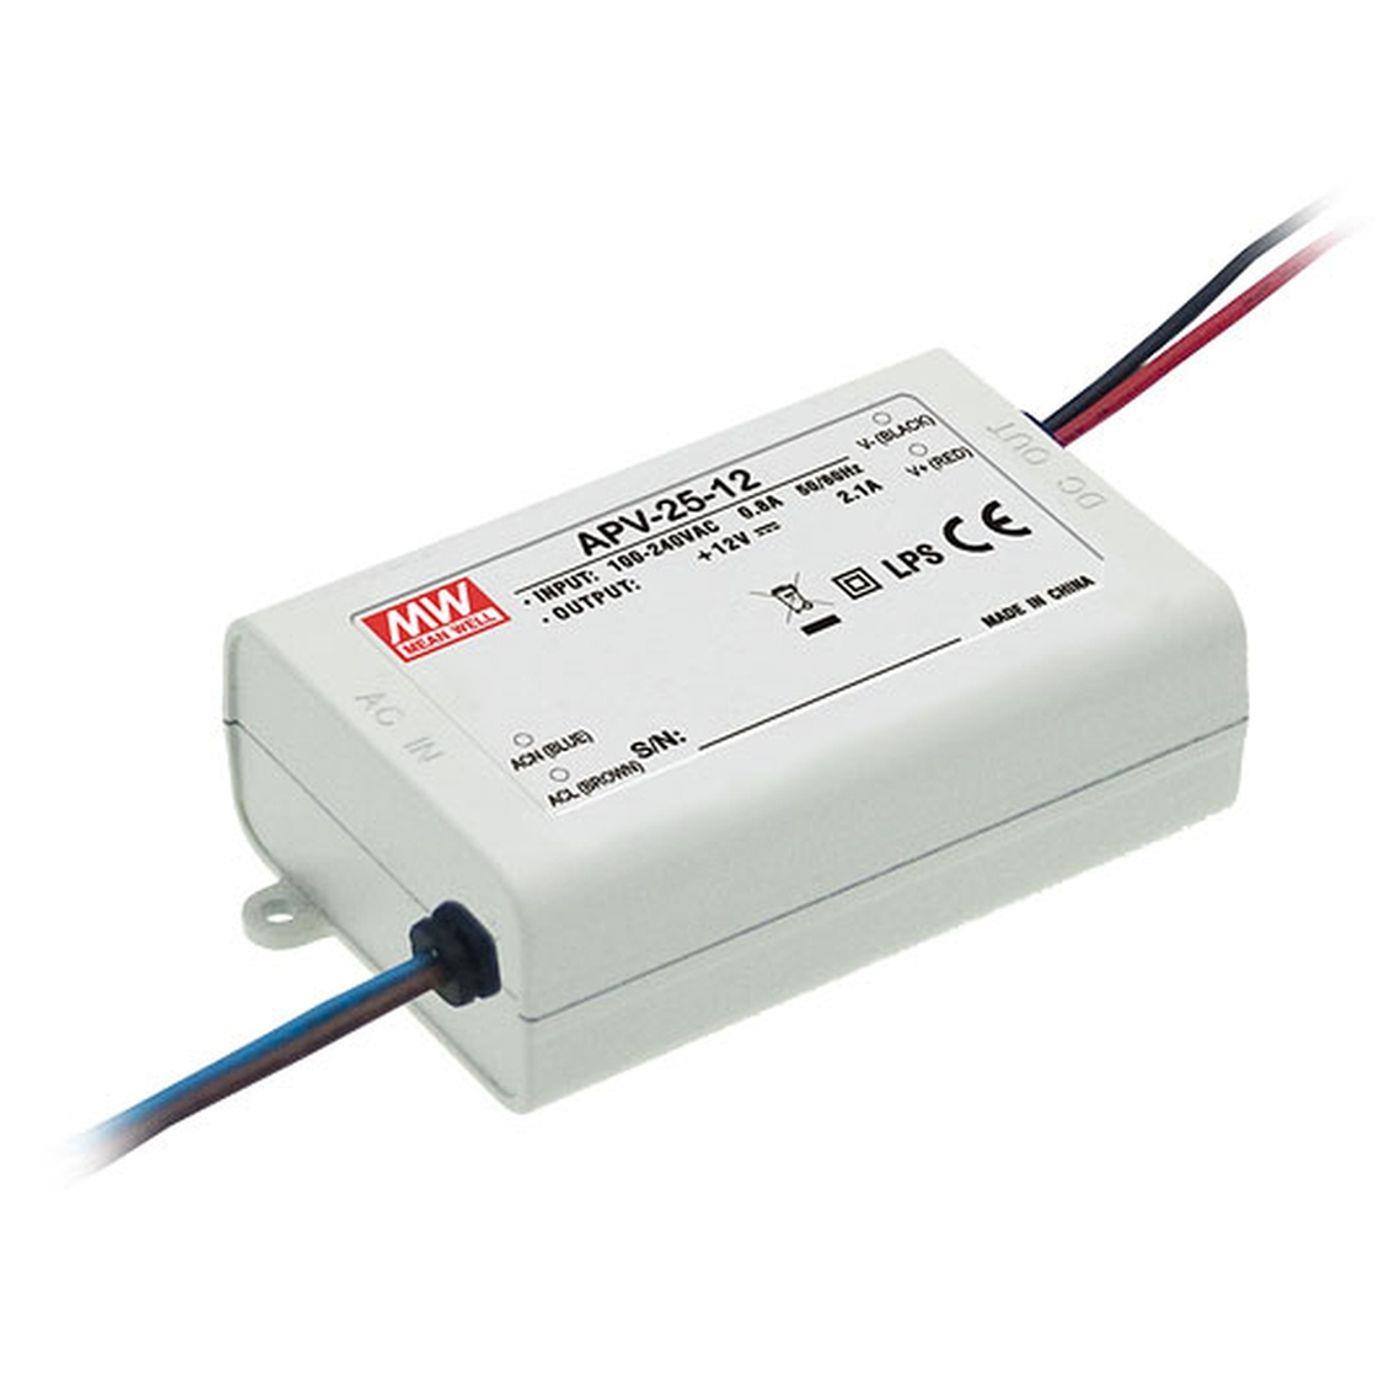 APC-25-350 25W 350mA 25...70VDC Constant current LED power supply Driver Transformer